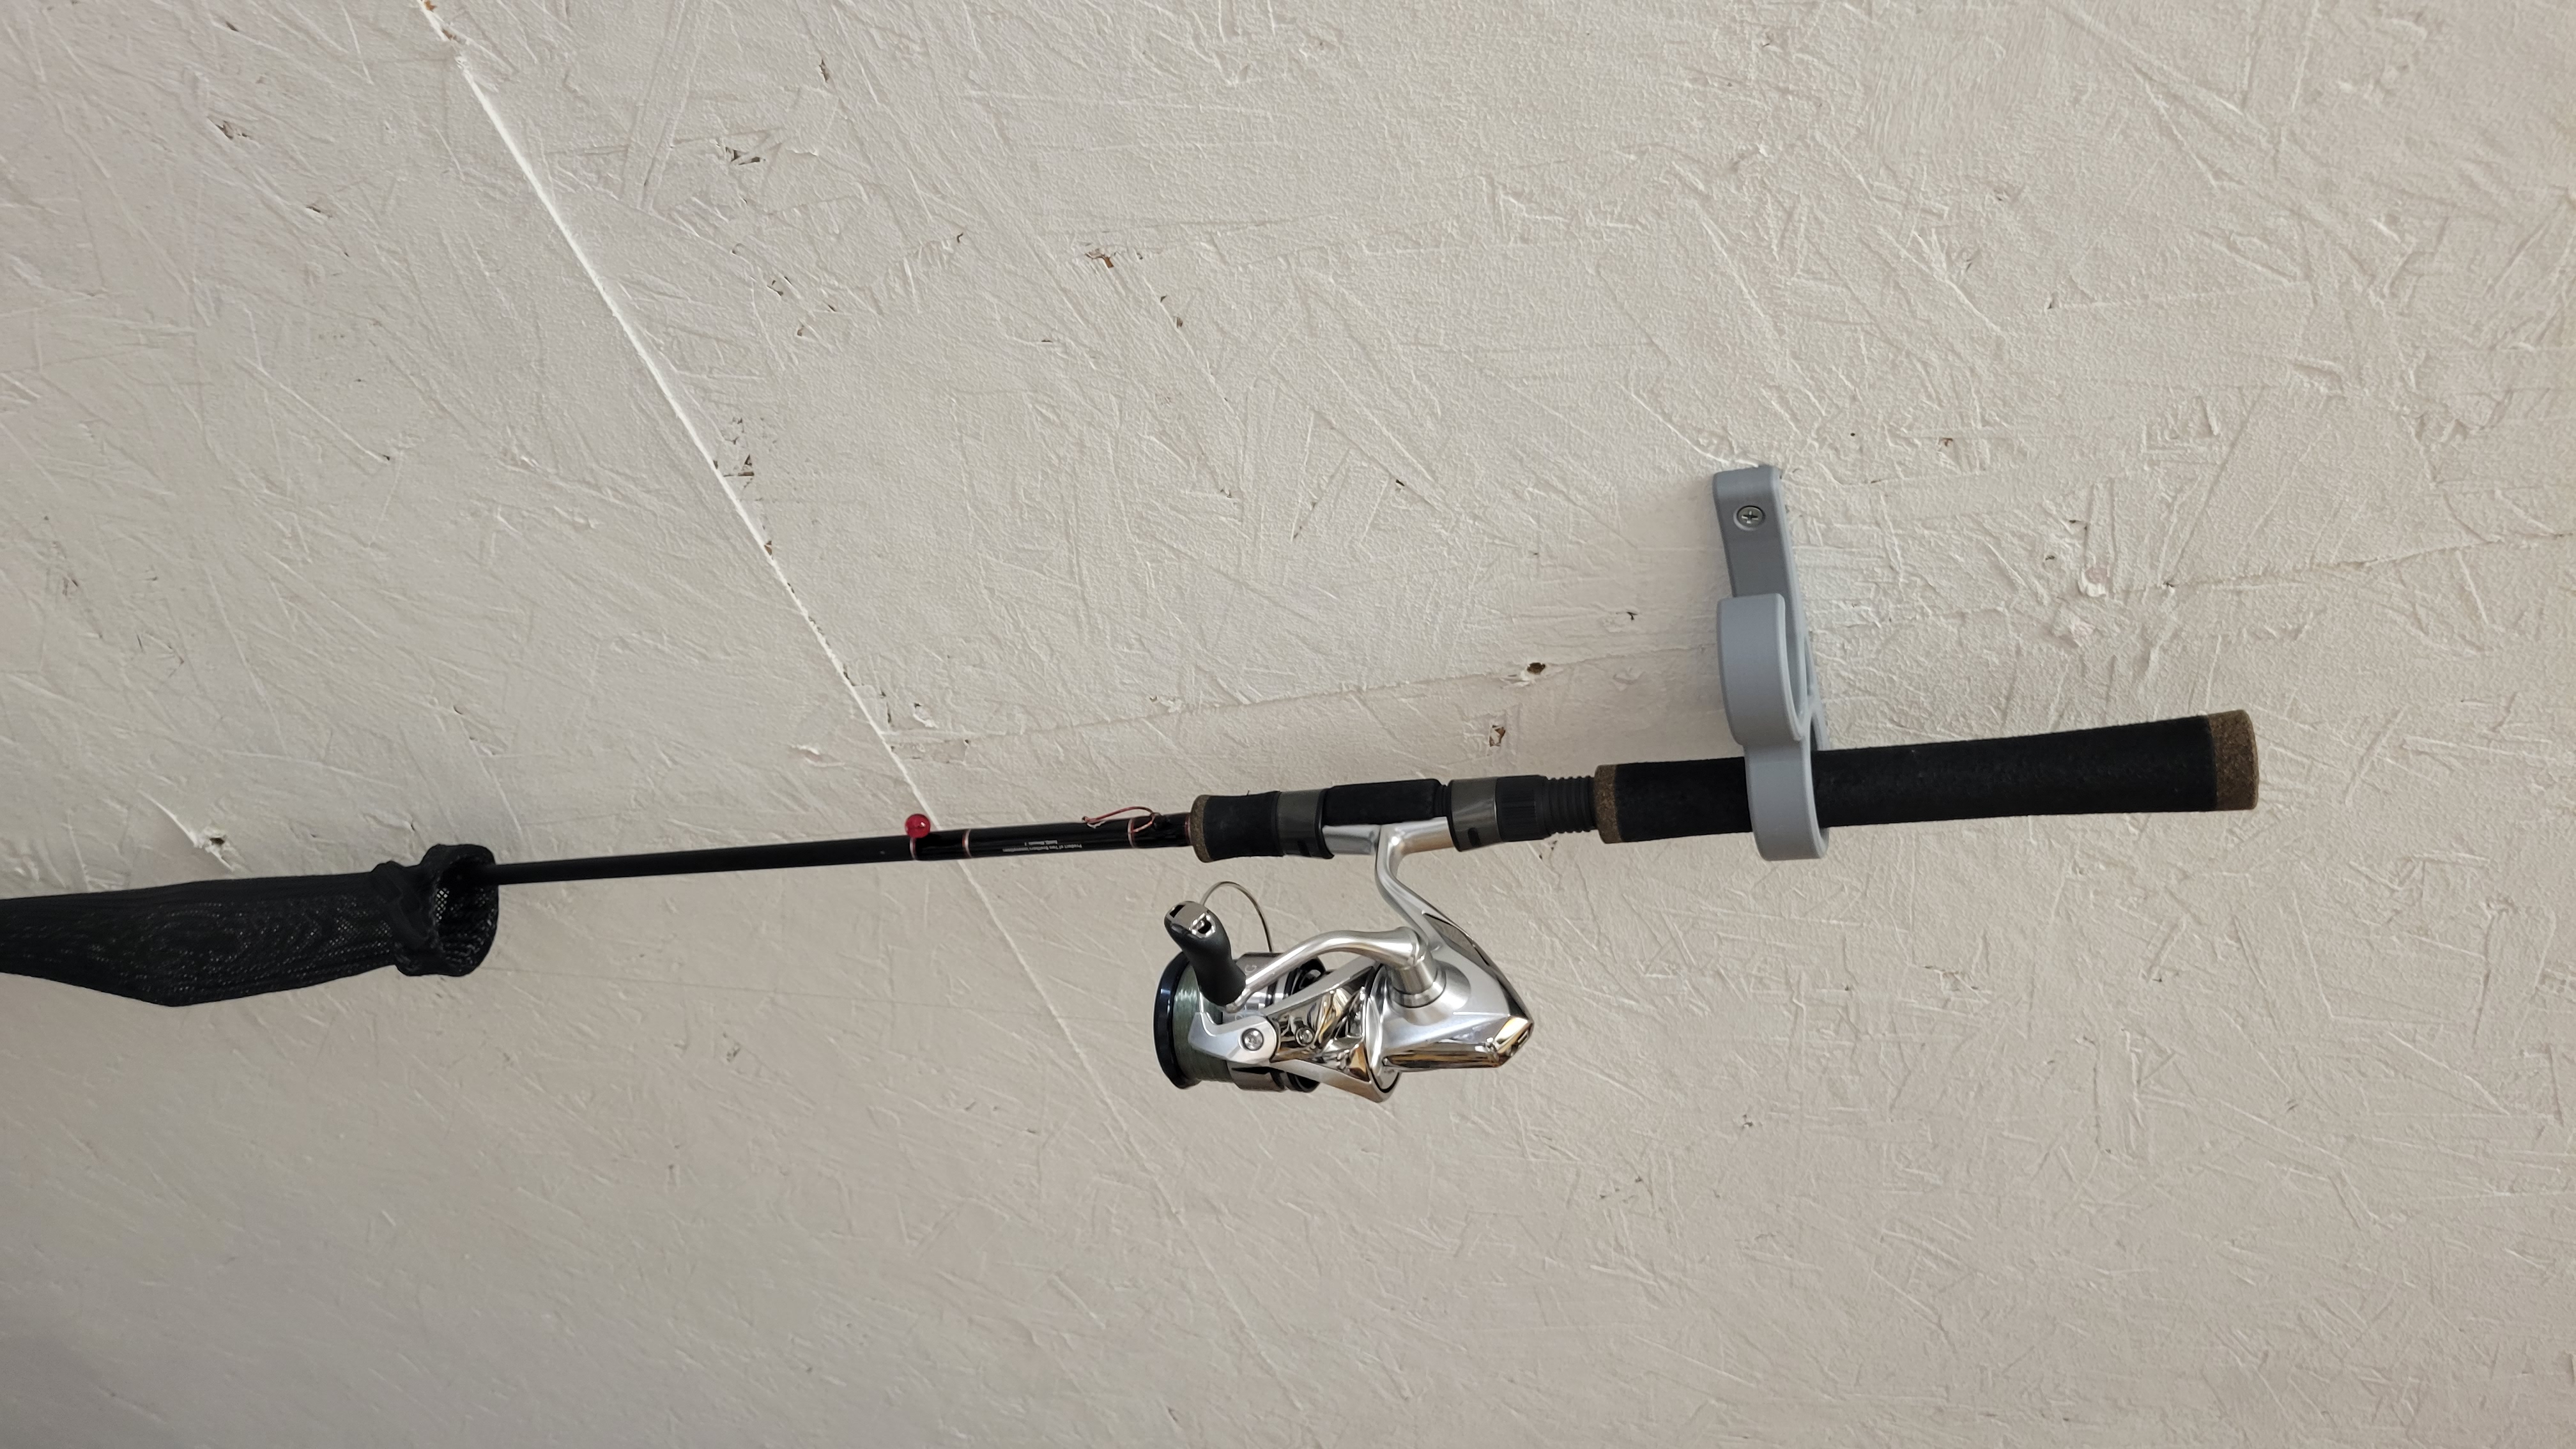 Ceiling Mount Fishing Rod Rack - 2 Parts by Tony, Download free STL model